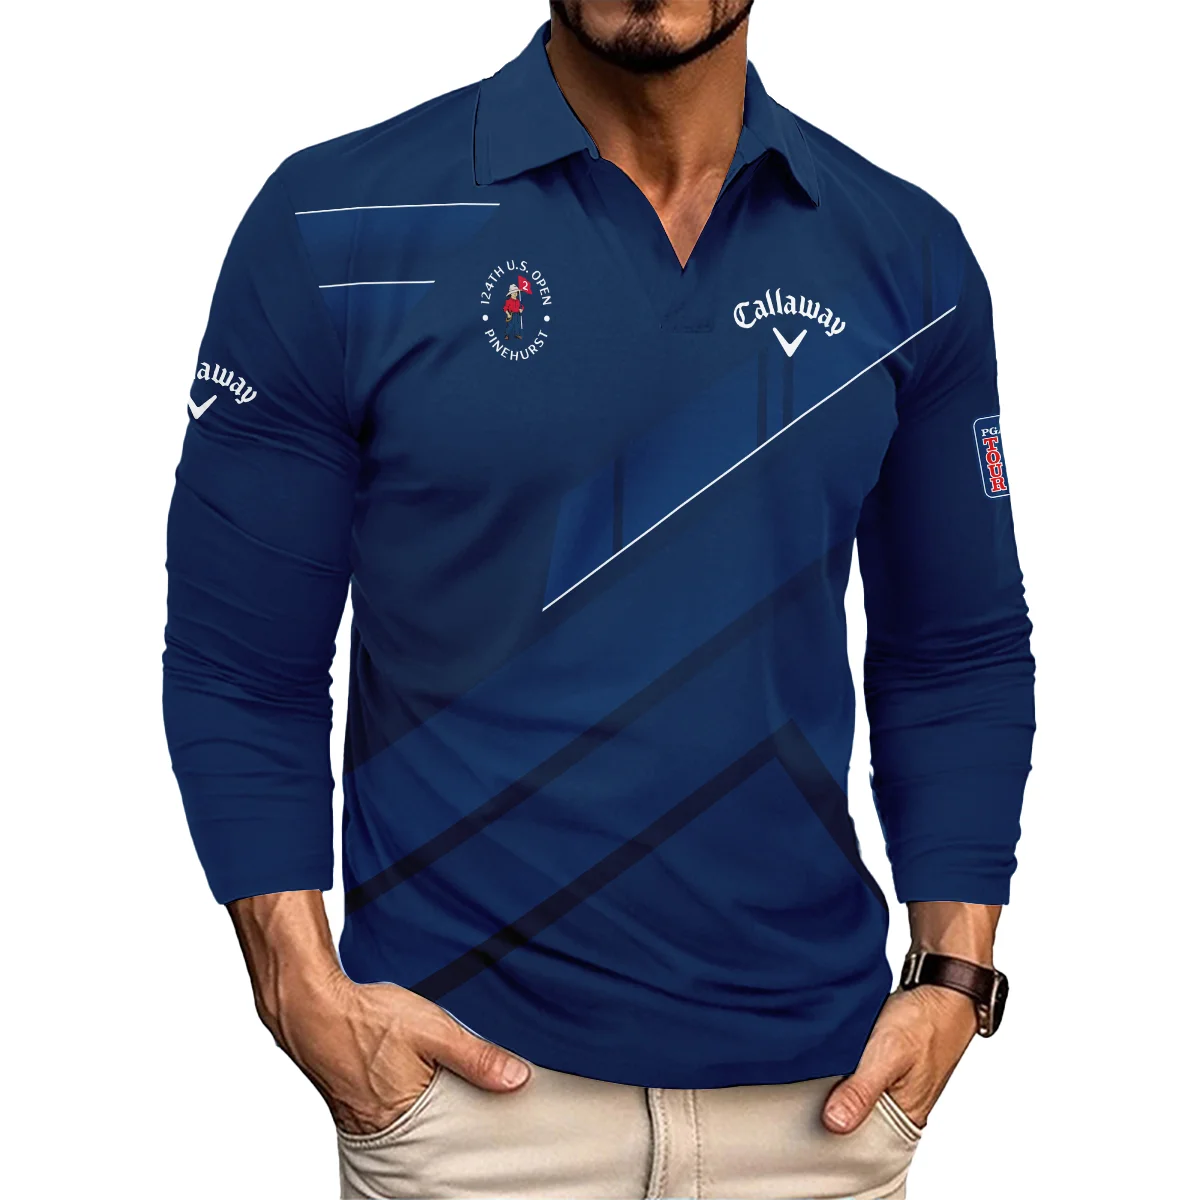 Callaway 124th U.S. Open Pinehurst Blue Gradient With White Straight Line Long Polo Shirt Style Classic Long Polo Shirt For Men